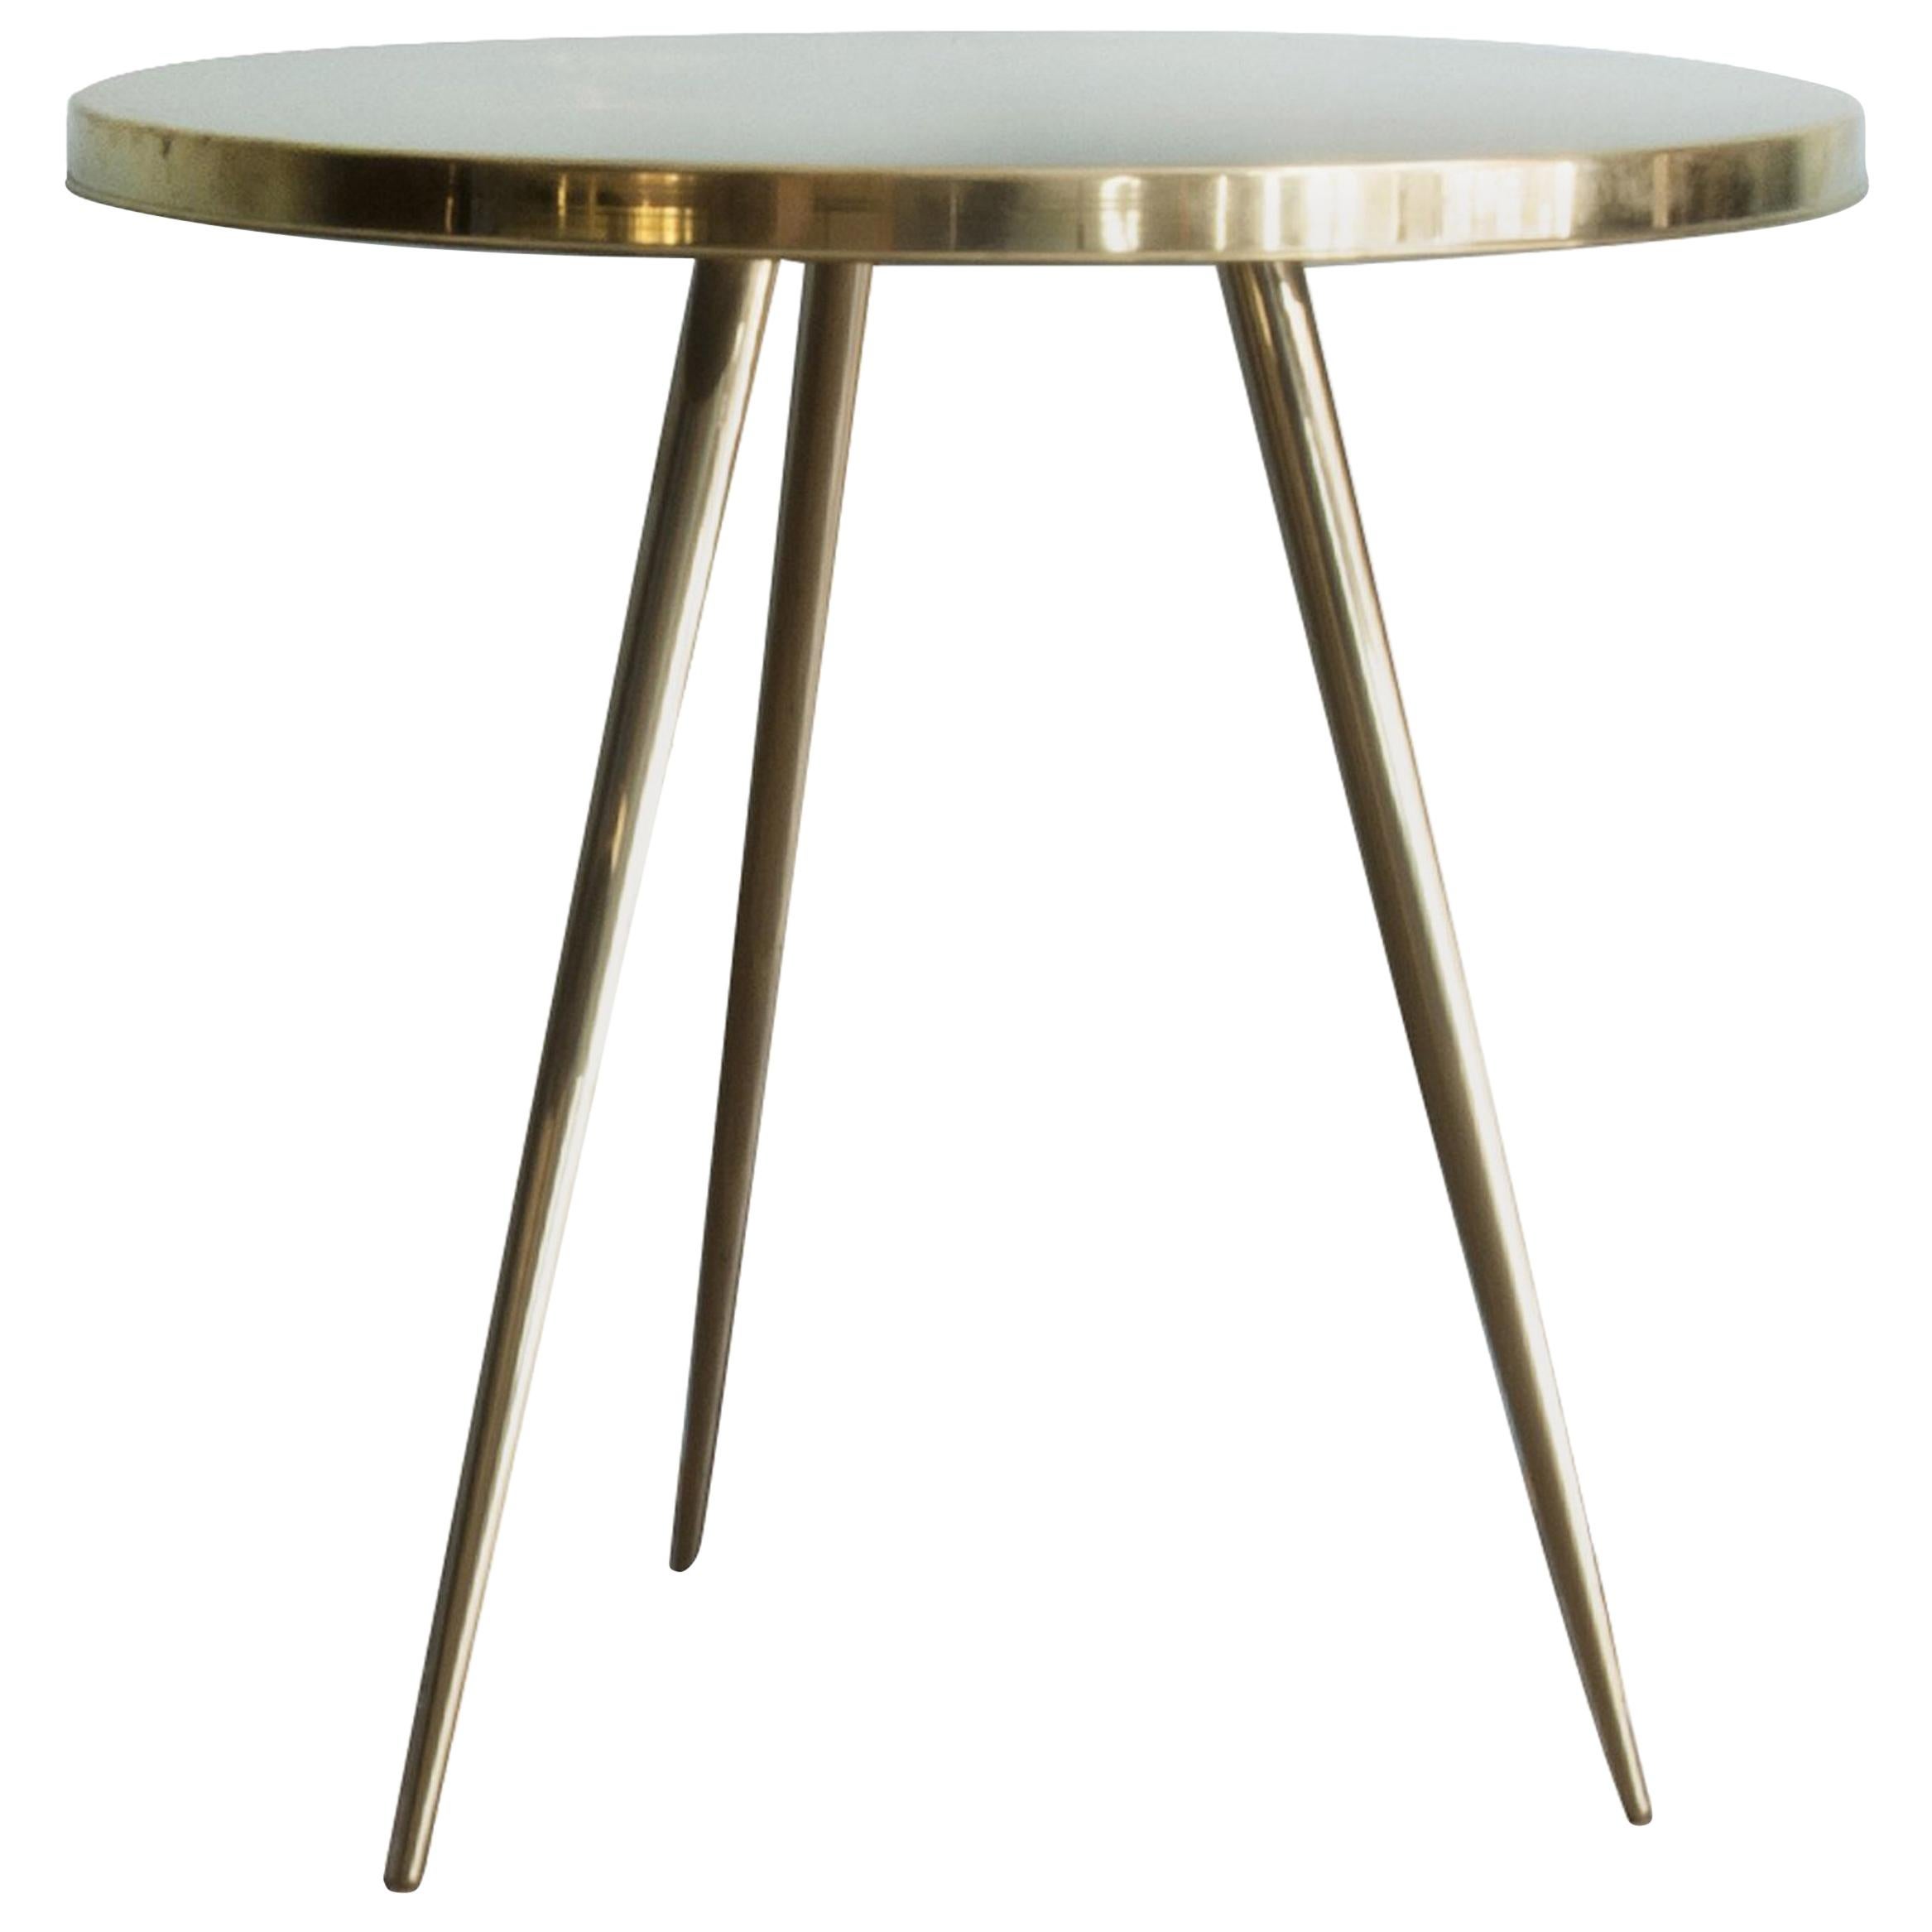 'Ishtar' Modern Coffee Table in Brass with Conical Ends For Sale